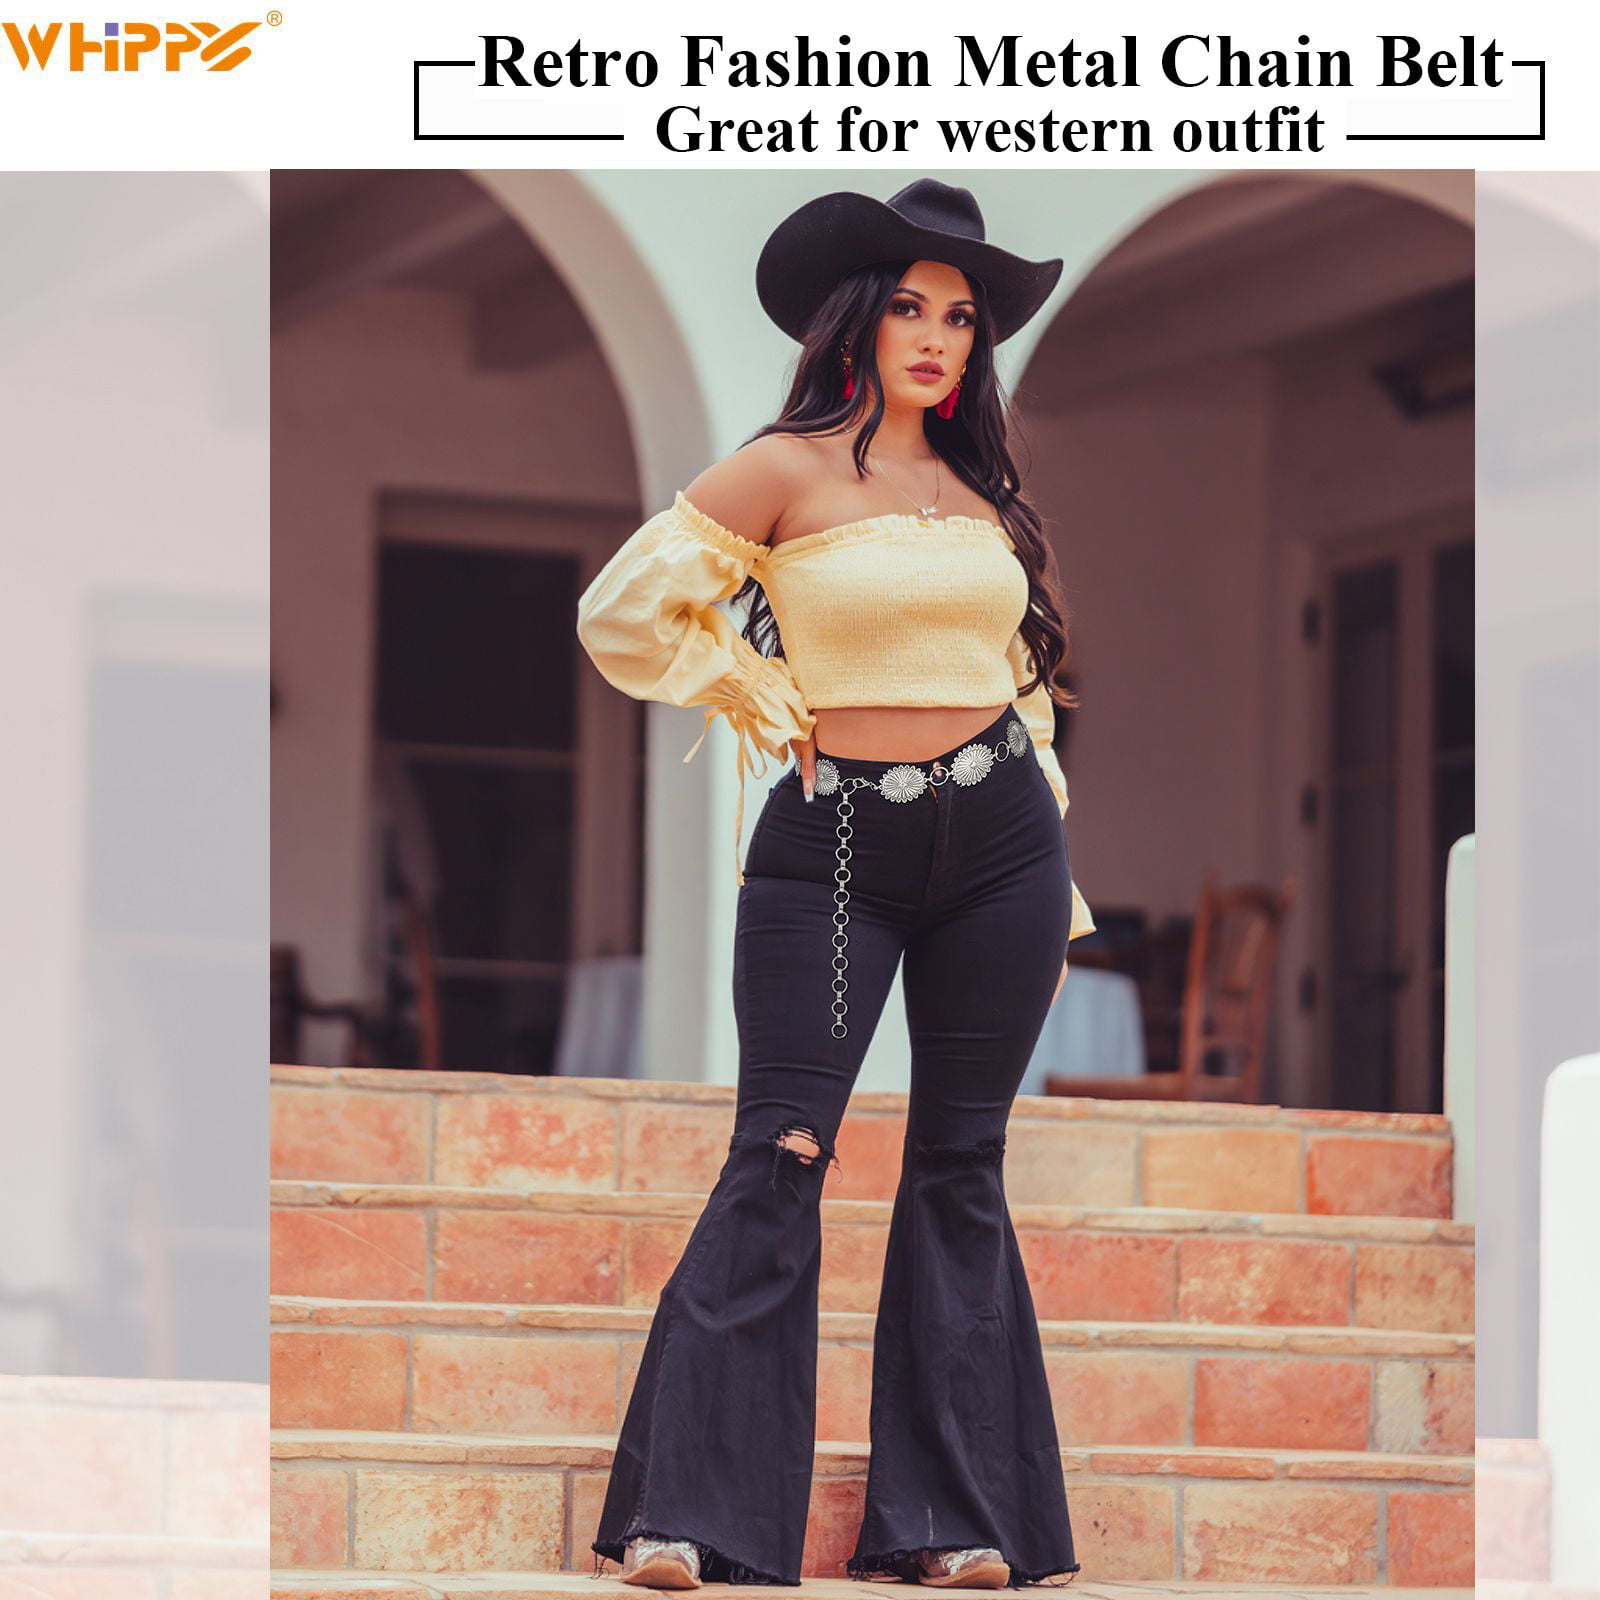 Fashion Harajuku Women Punk Chain Belt Adjustable Black Double/Single  Eyelet Grommet Metal Buckle Leather Waistband For Jeans - Price history &  Review | AliExpress Seller - Menore Uniq Store | Alitools.io